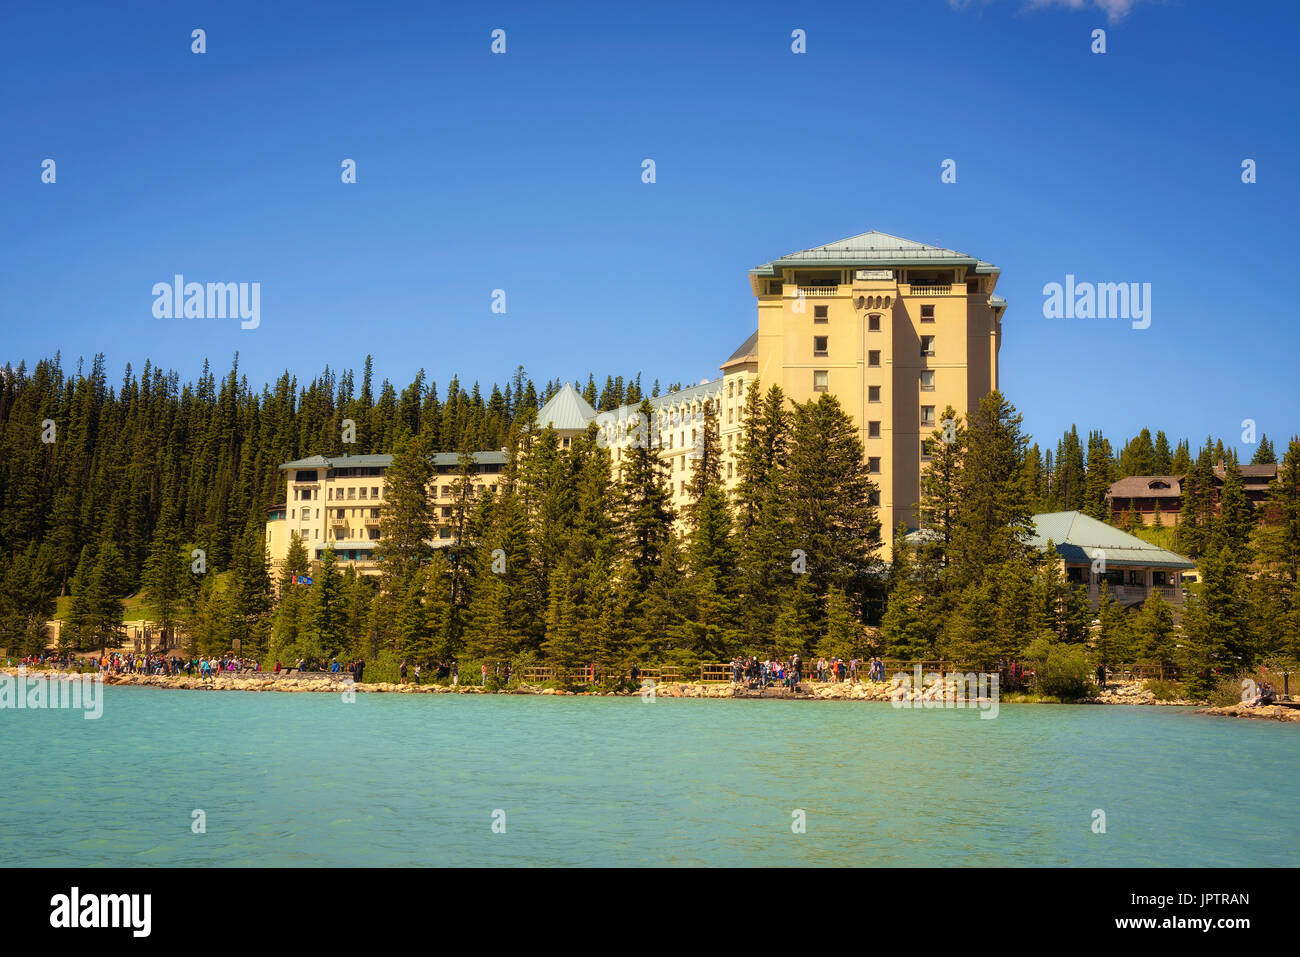 Many tourists enjoying a sunny day at the Fairmont Chateau Lake Louise in canadian Rocky Mountains. Stock Photo